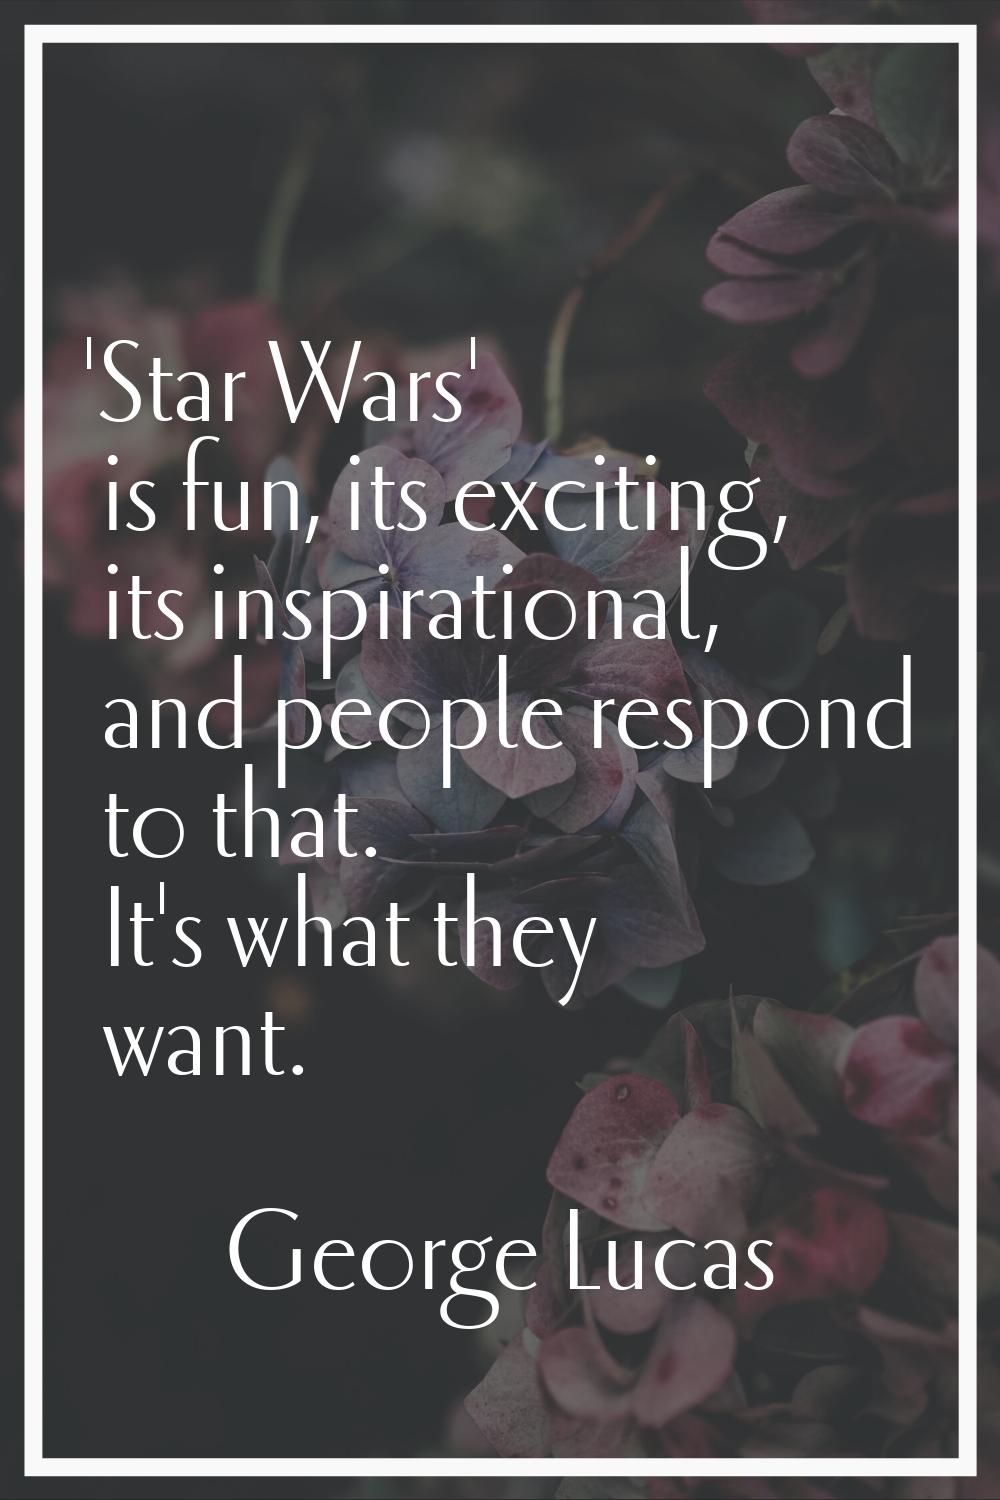 'Star Wars' is fun, its exciting, its inspirational, and people respond to that. It's what they wan